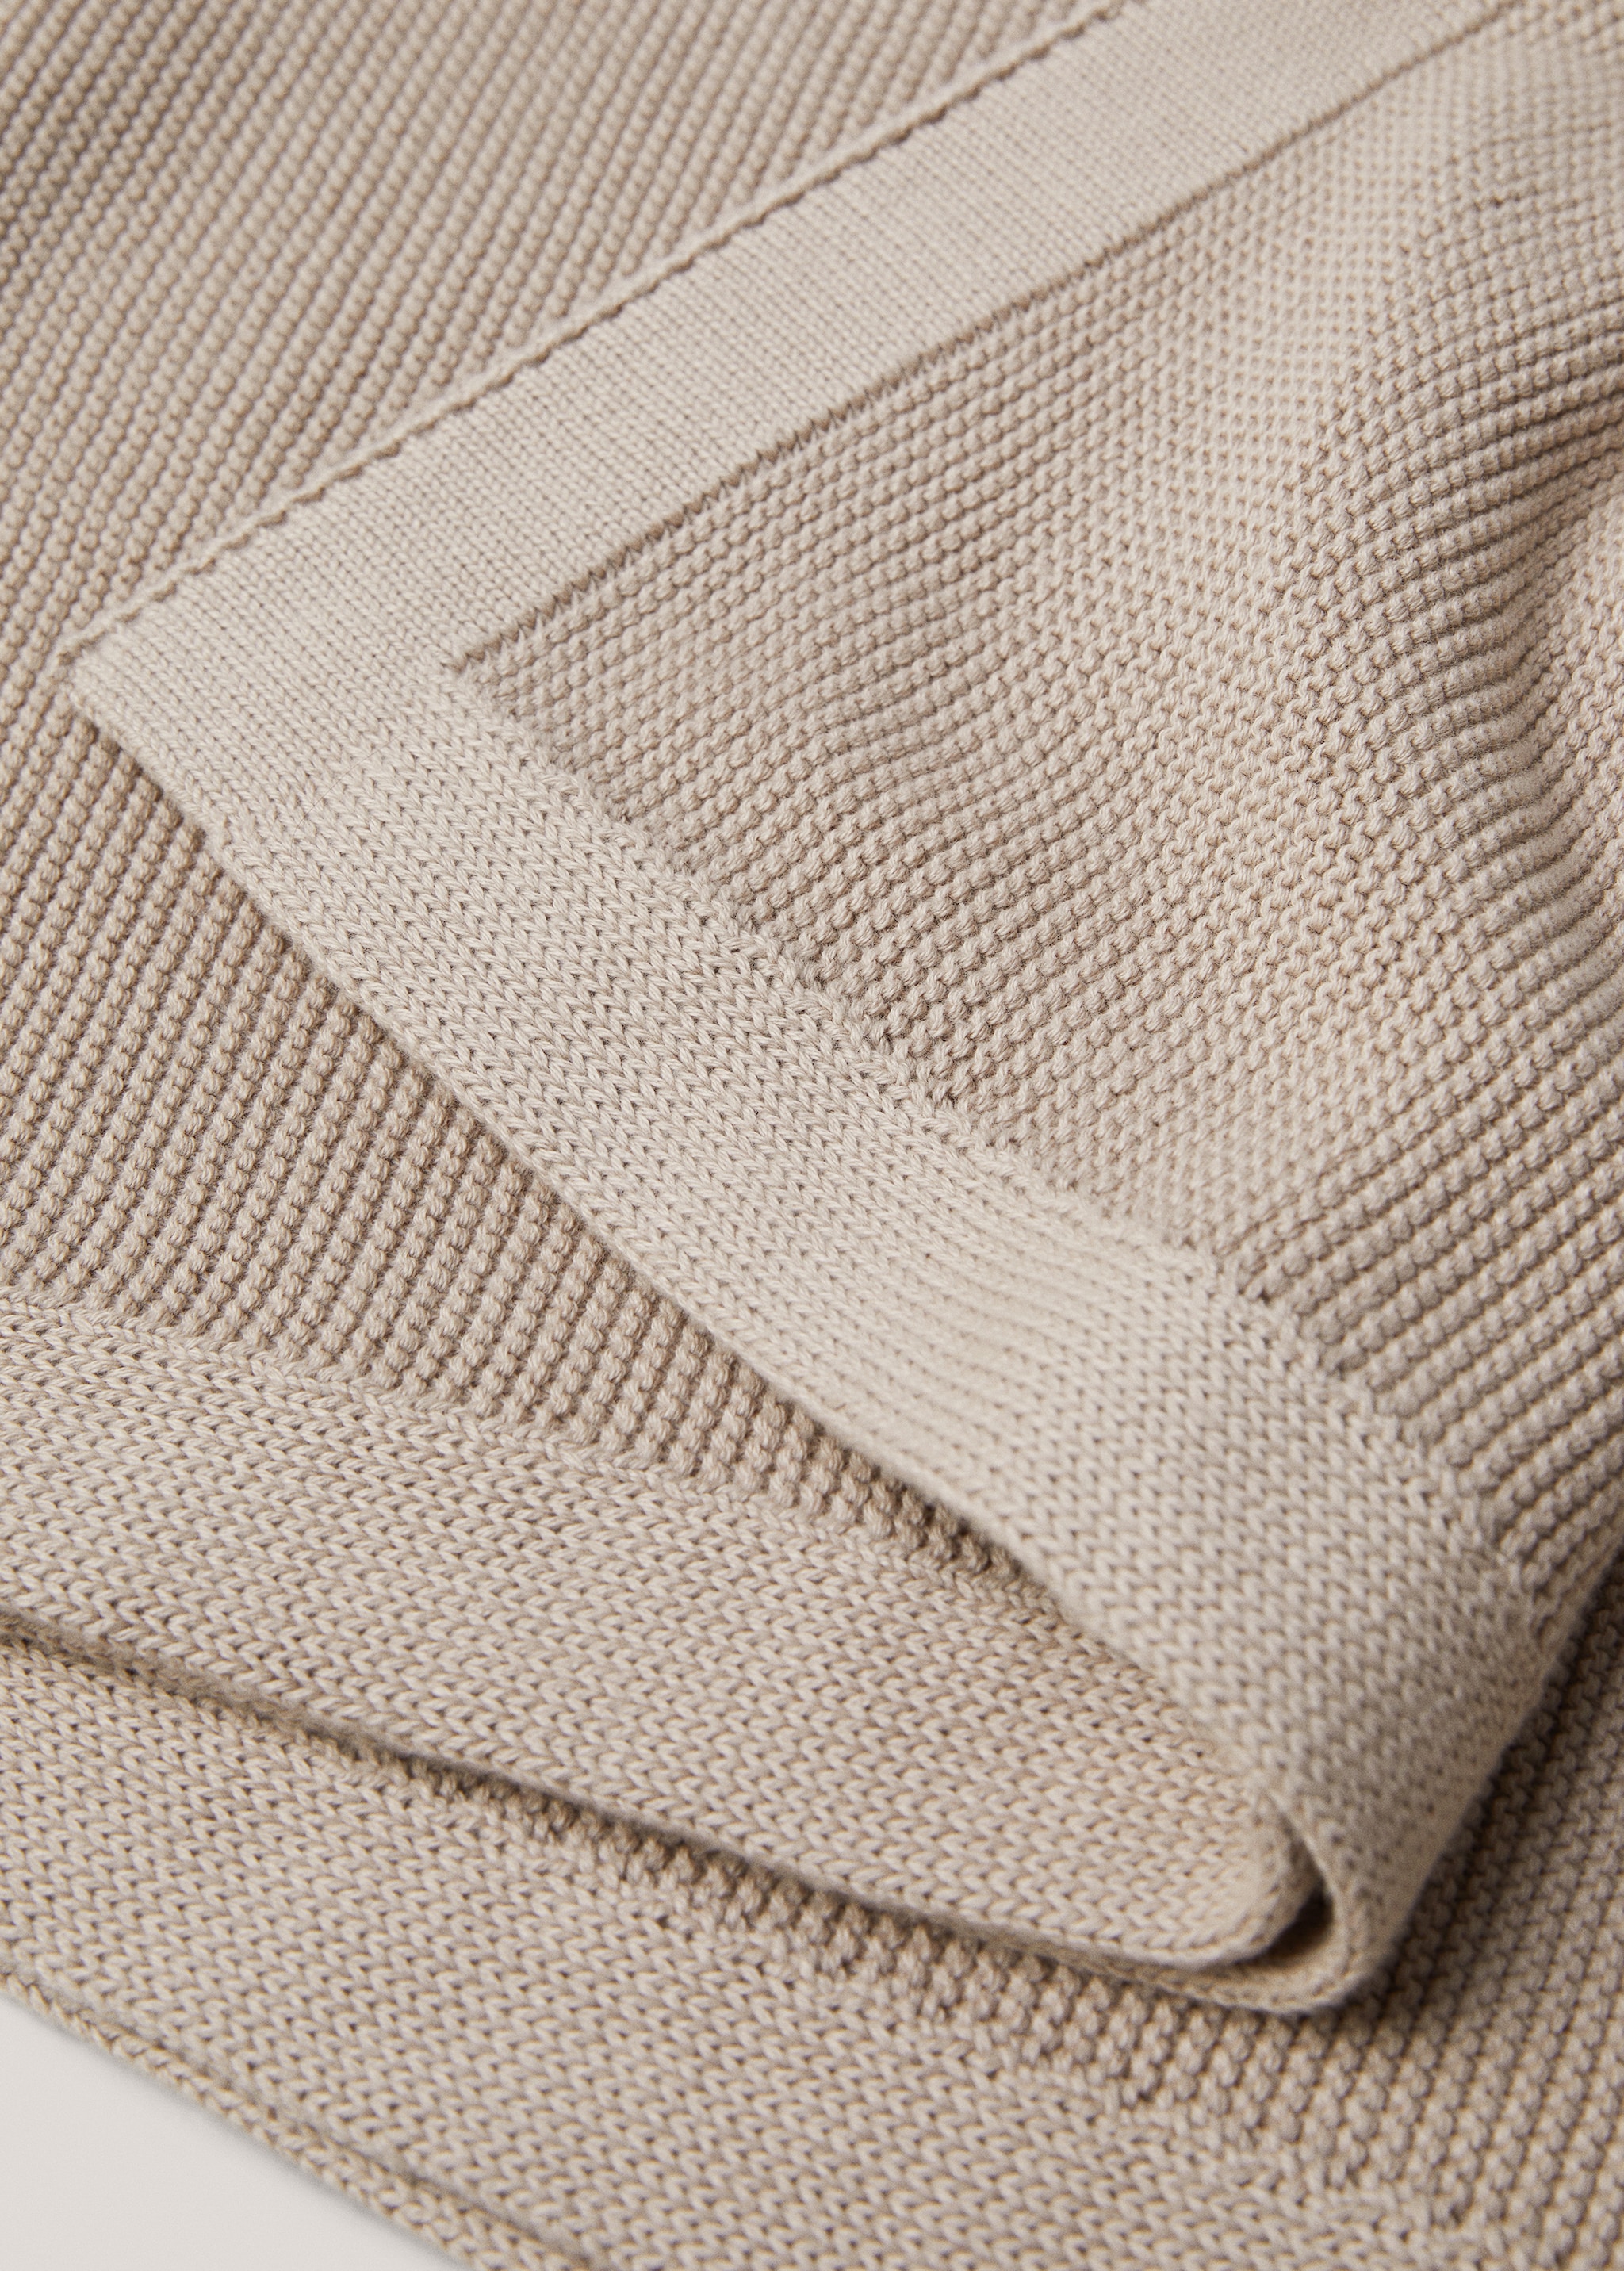 Ribbed cotton blanket 130x180cm - Details of the article 2